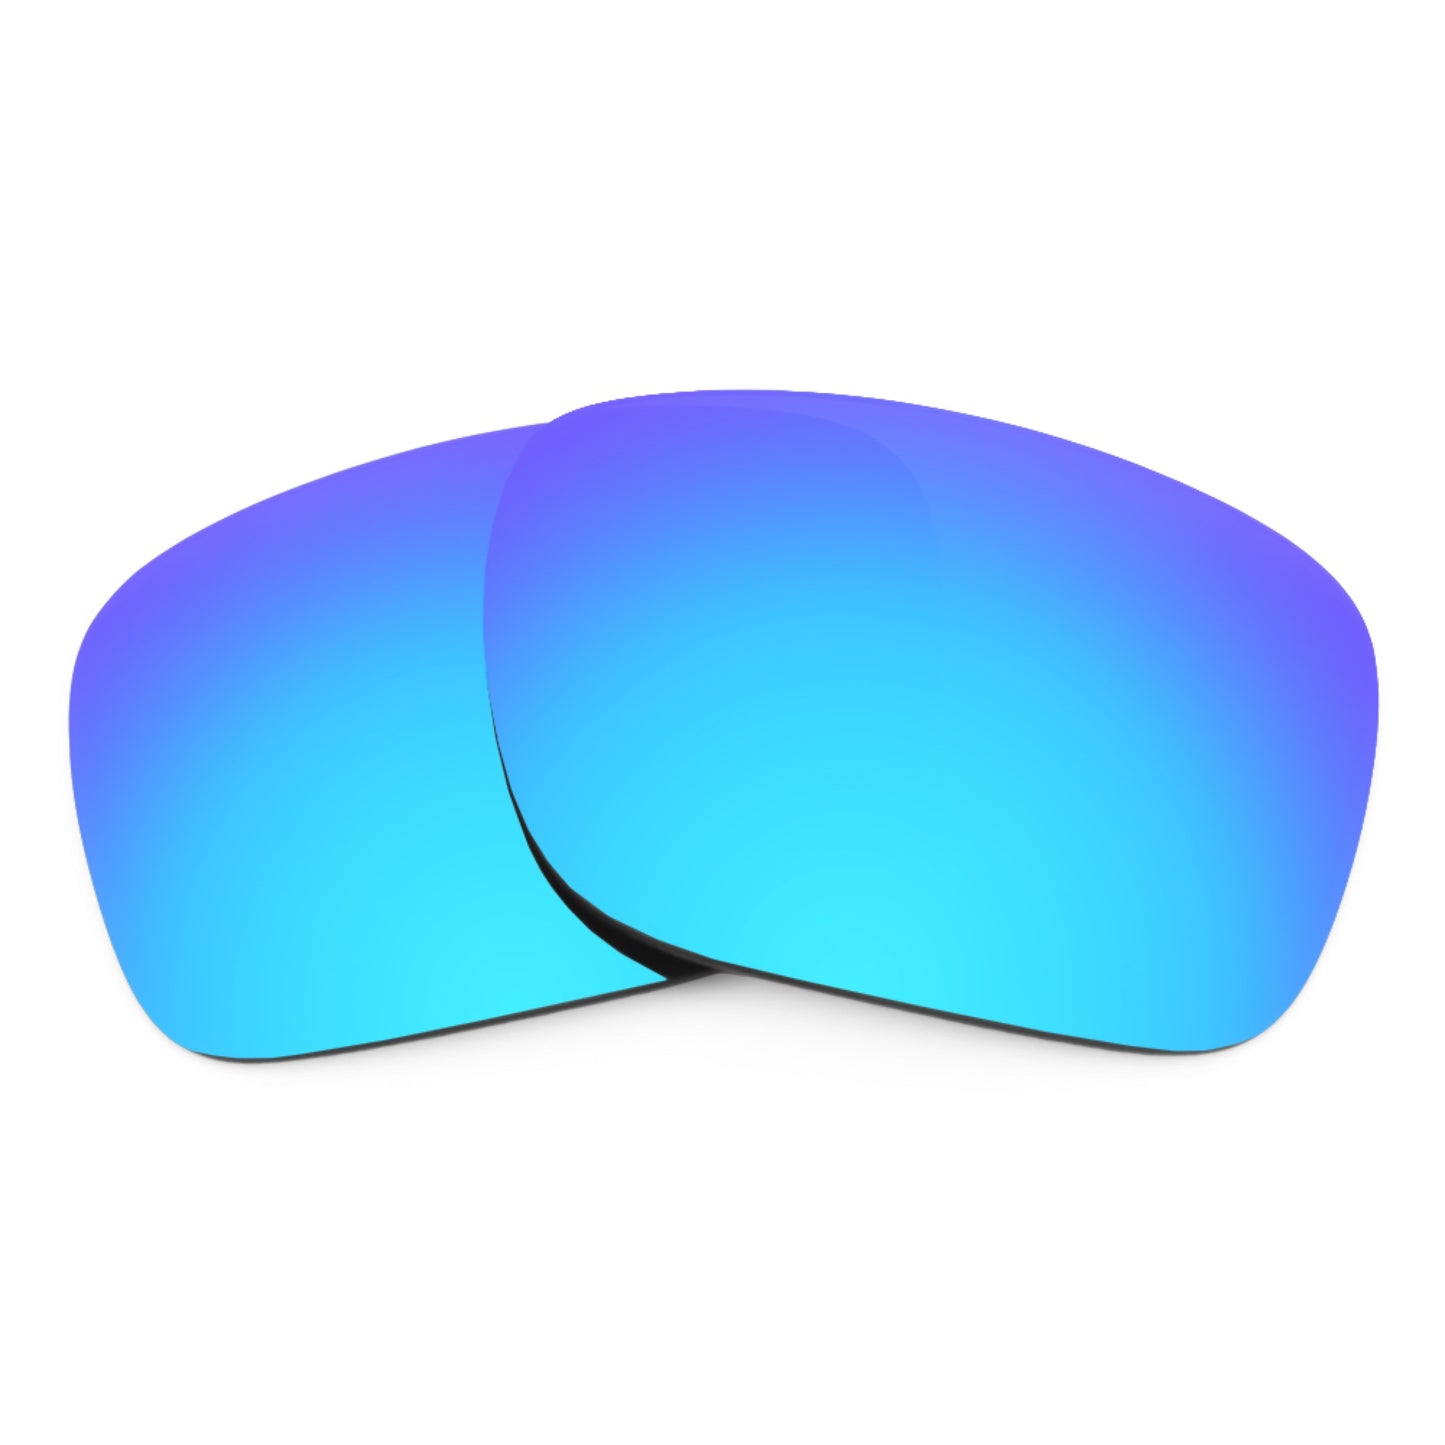 Revant replacement lenses for Ray-Ban Drifter (B&L) 56mm Non-Polarized Ice Blue